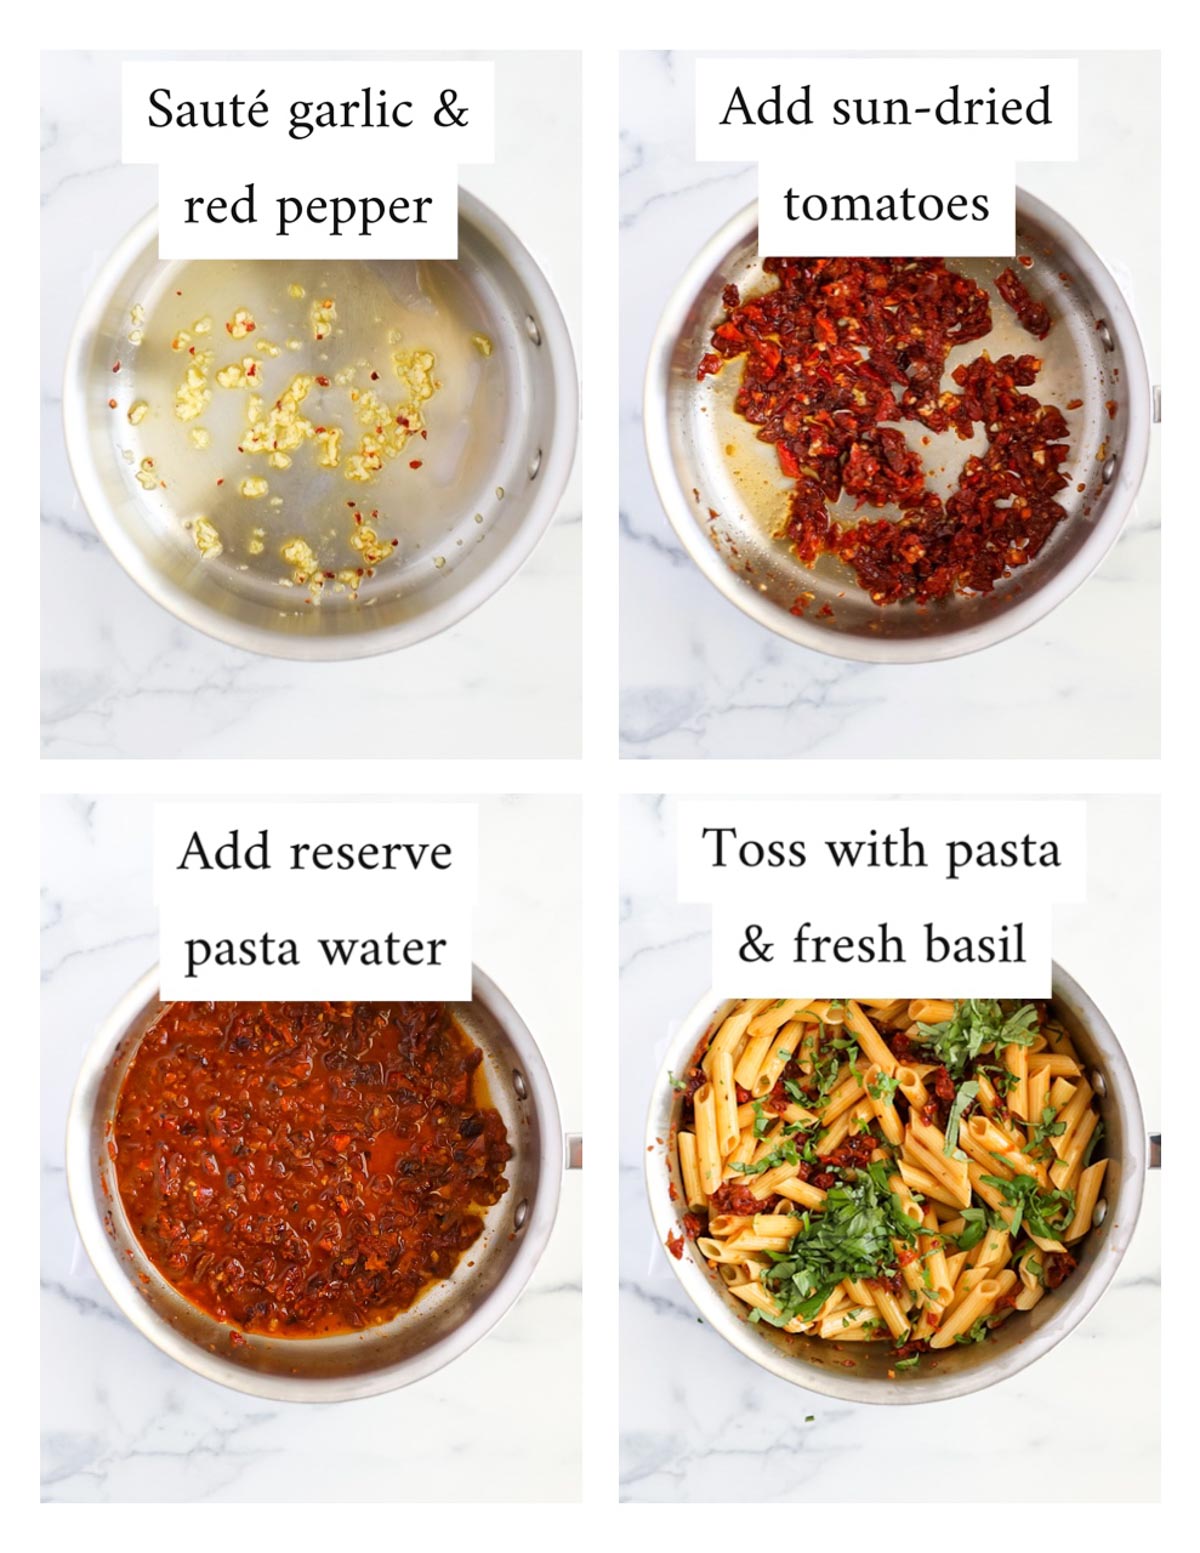 Labeled step by step instructions for making pasta including: saute garlic & red pepper, add sun-dried tomatoes, add reserve pasta water, toss with pasta and fresh basil